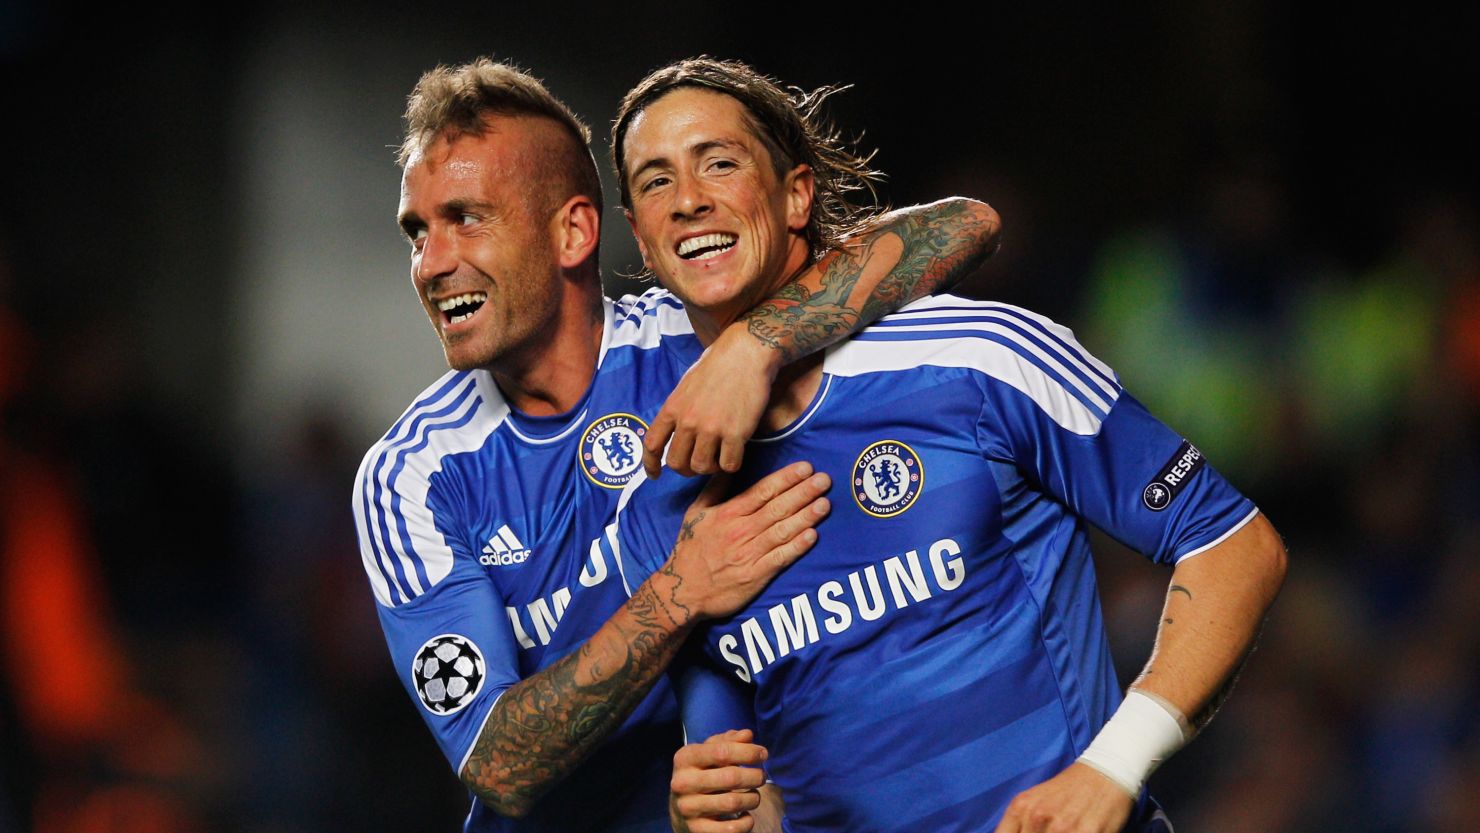 Fernando Torres is congratulated by Raul Mereiles after scoring at Stamford Bridge against Genk 